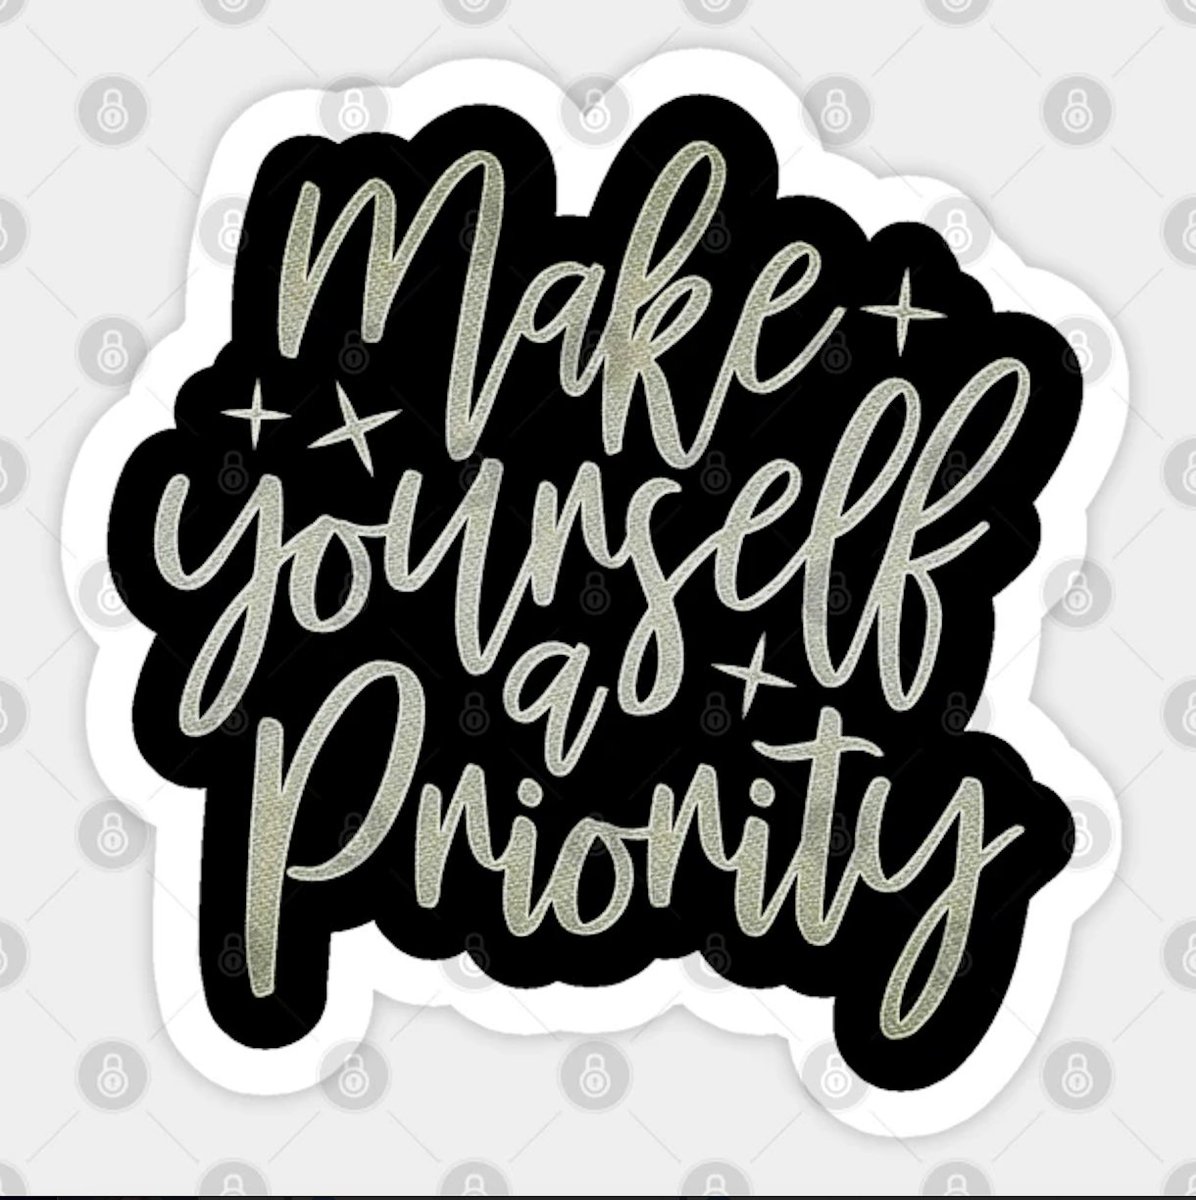 Make Yourself a Priority

#LivingLovingLife #GreatResignation
#OnlineIncomeOpportunity #WorkFromAnywhere #OnlineBusinessSolution #worksmarternotharder